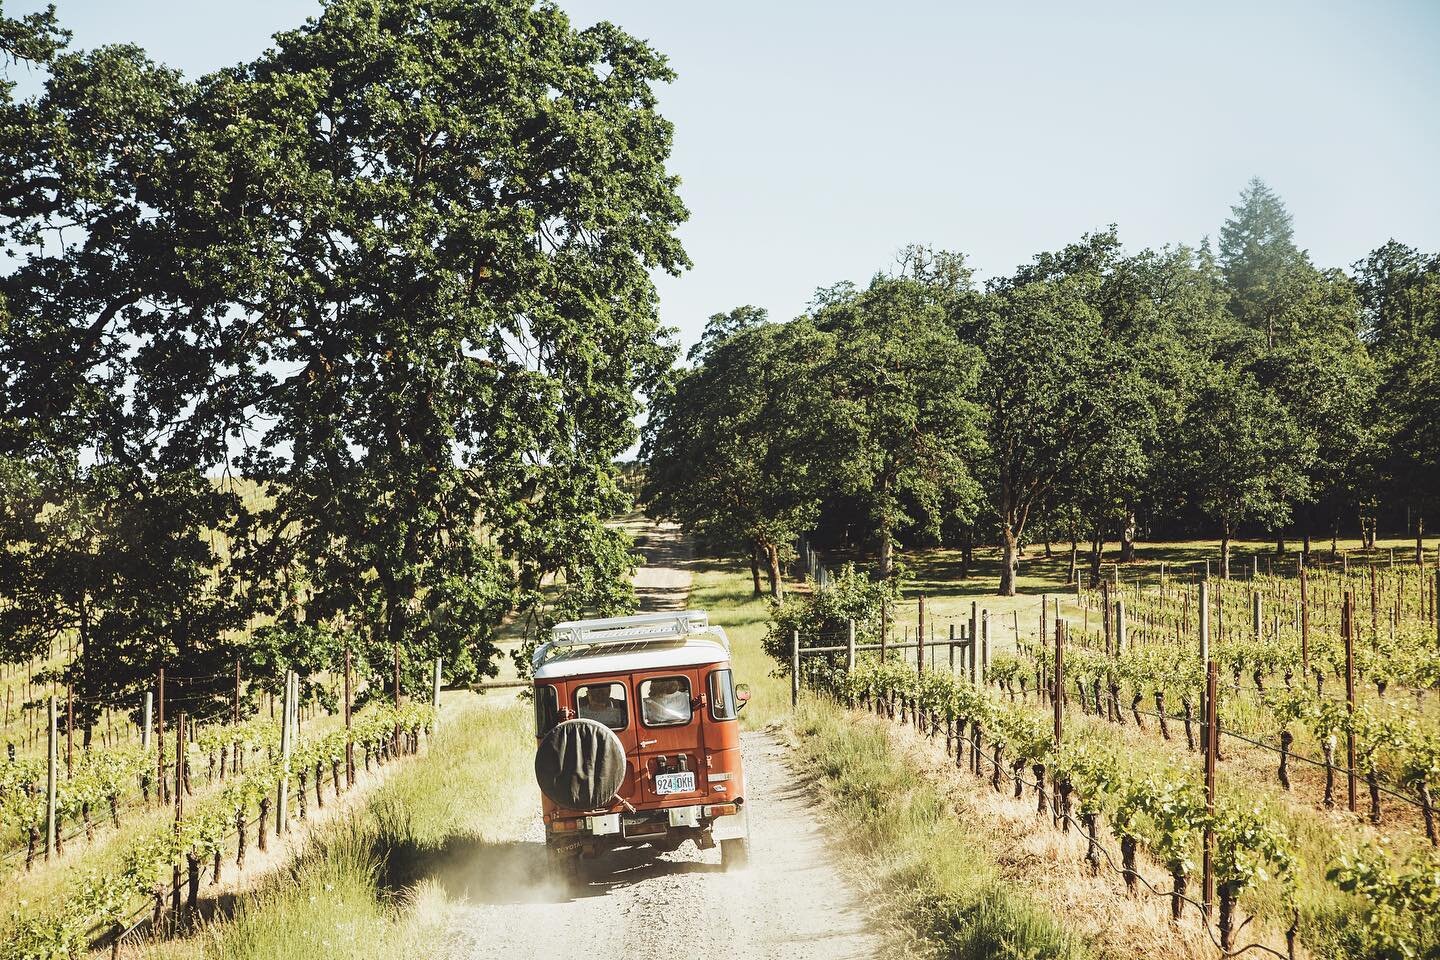 I spent the day with my friends at @leftcoastwine following their BJ Cruiser on a tour of the estate. From a worn path through the oak savannah to a sun-drenched ramble through waist-high grasses overlooking the Willamette Valley, it&rsquo;s definite